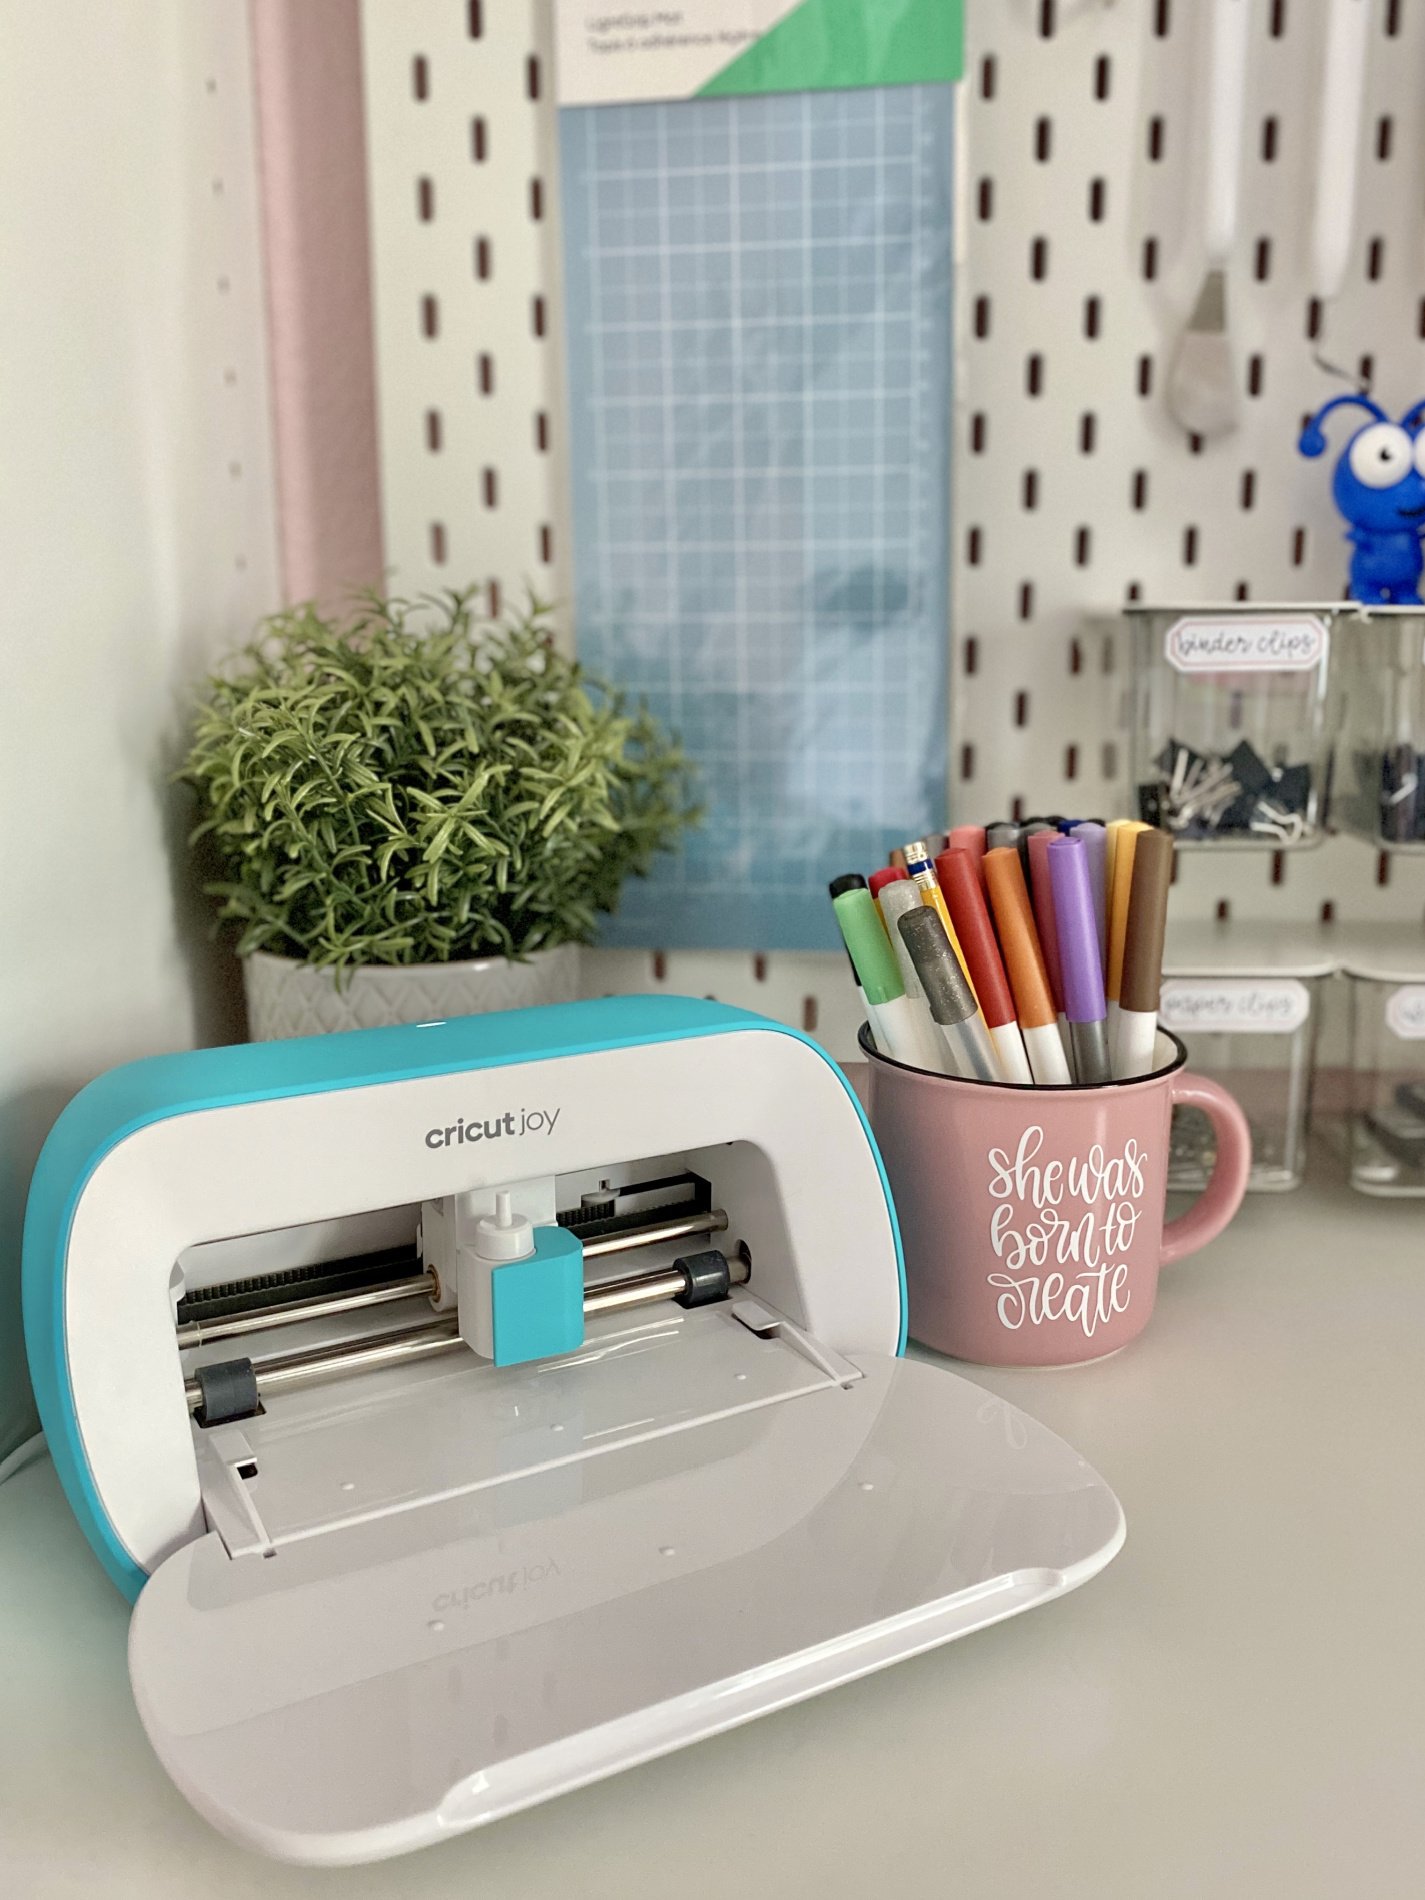 Cricut Joy with peg board in background with Cricut blue mat and pink cup.